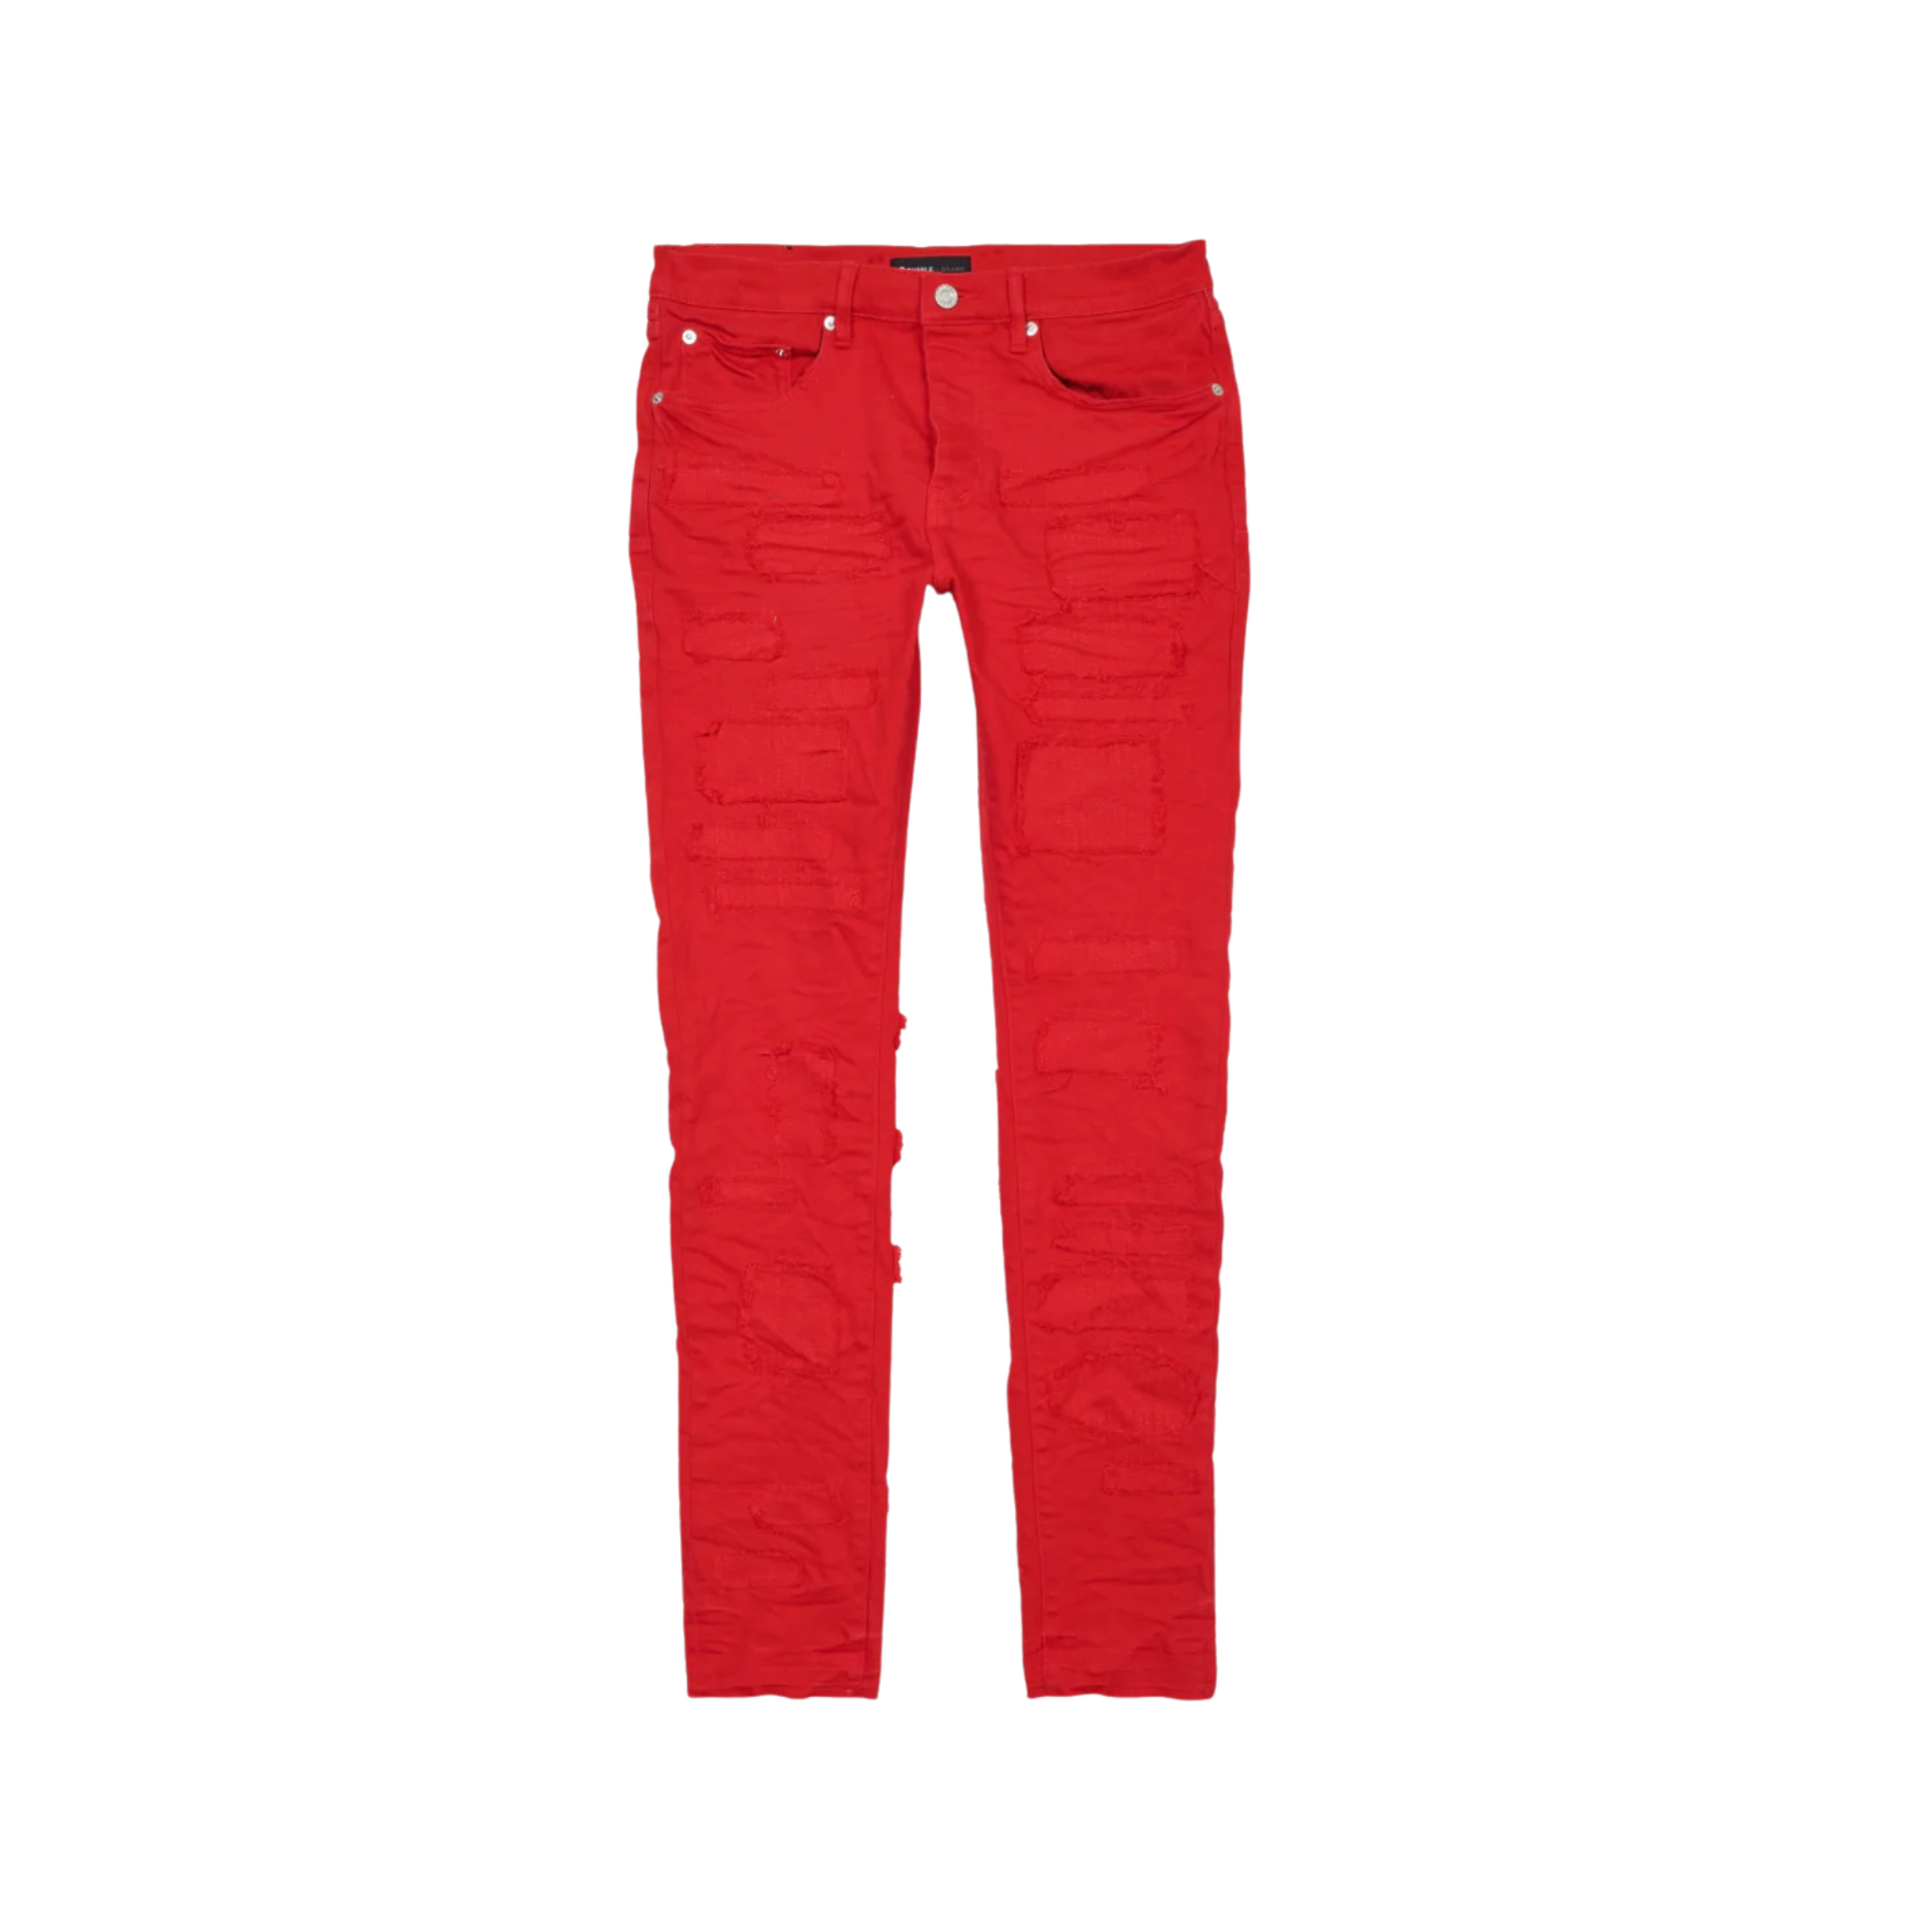 PURPLE BRAND JEANS LOW RISE SKINNY JEAN - RED JACKET PATCH REPAIR – The  Superior Shop